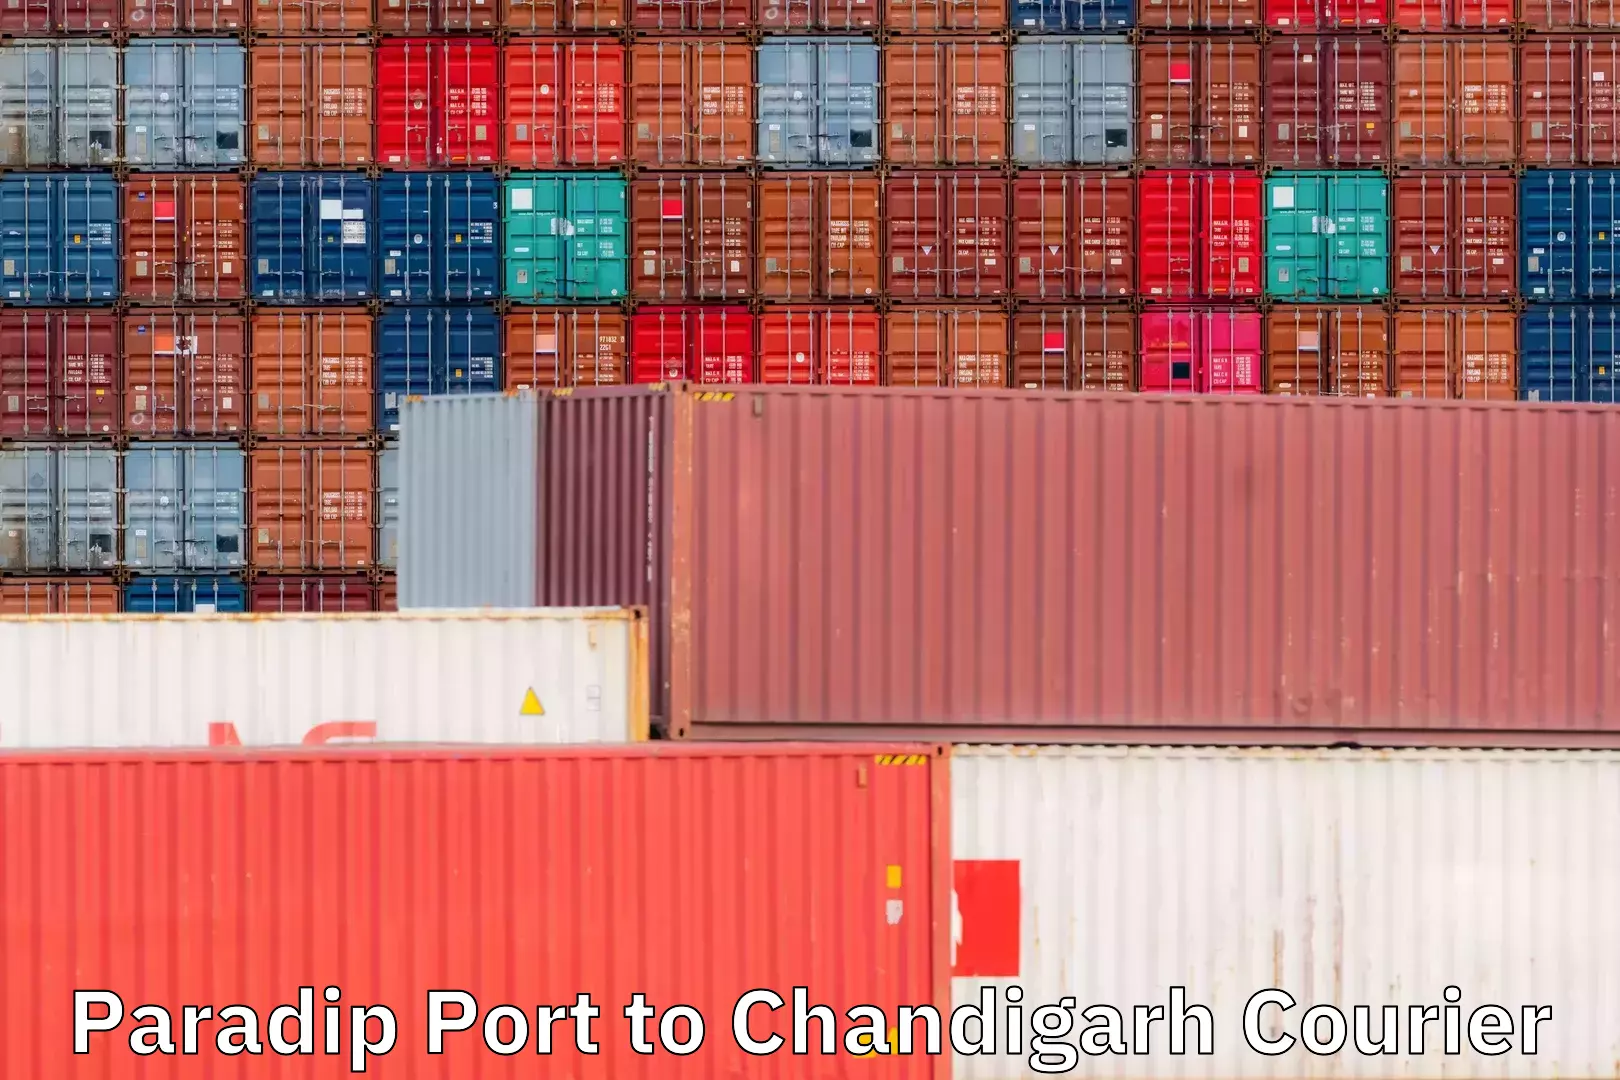 Online courier booking Paradip Port to Chandigarh